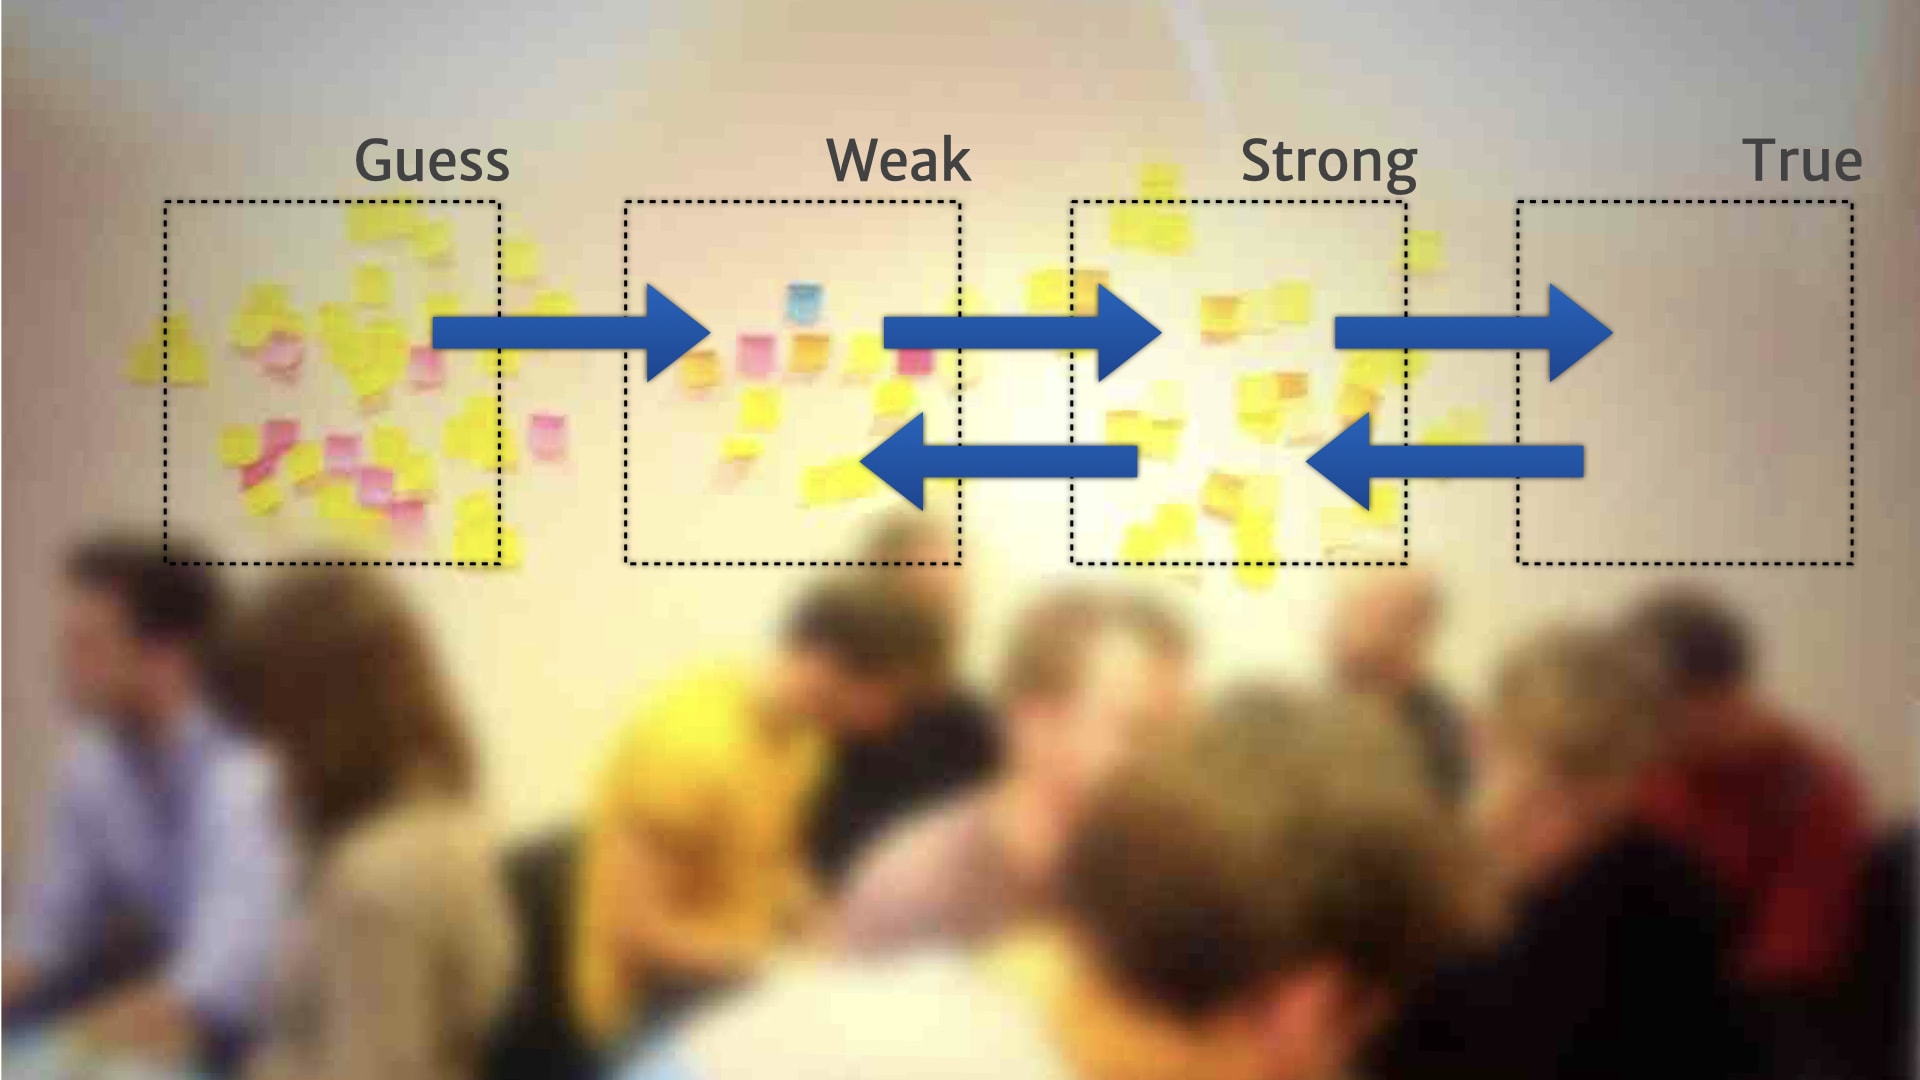 A picture of a wall of post-it notes divided into four categories running left to right (Guess, Weak, Strong, and True). Blue arrows running left-to-right show transitions from Guess to Weak, from Weak to Strong, and from Strong to True. Blue arrows running right-to-left illustrates a transition back from True to Strong, and from Strong to weak.